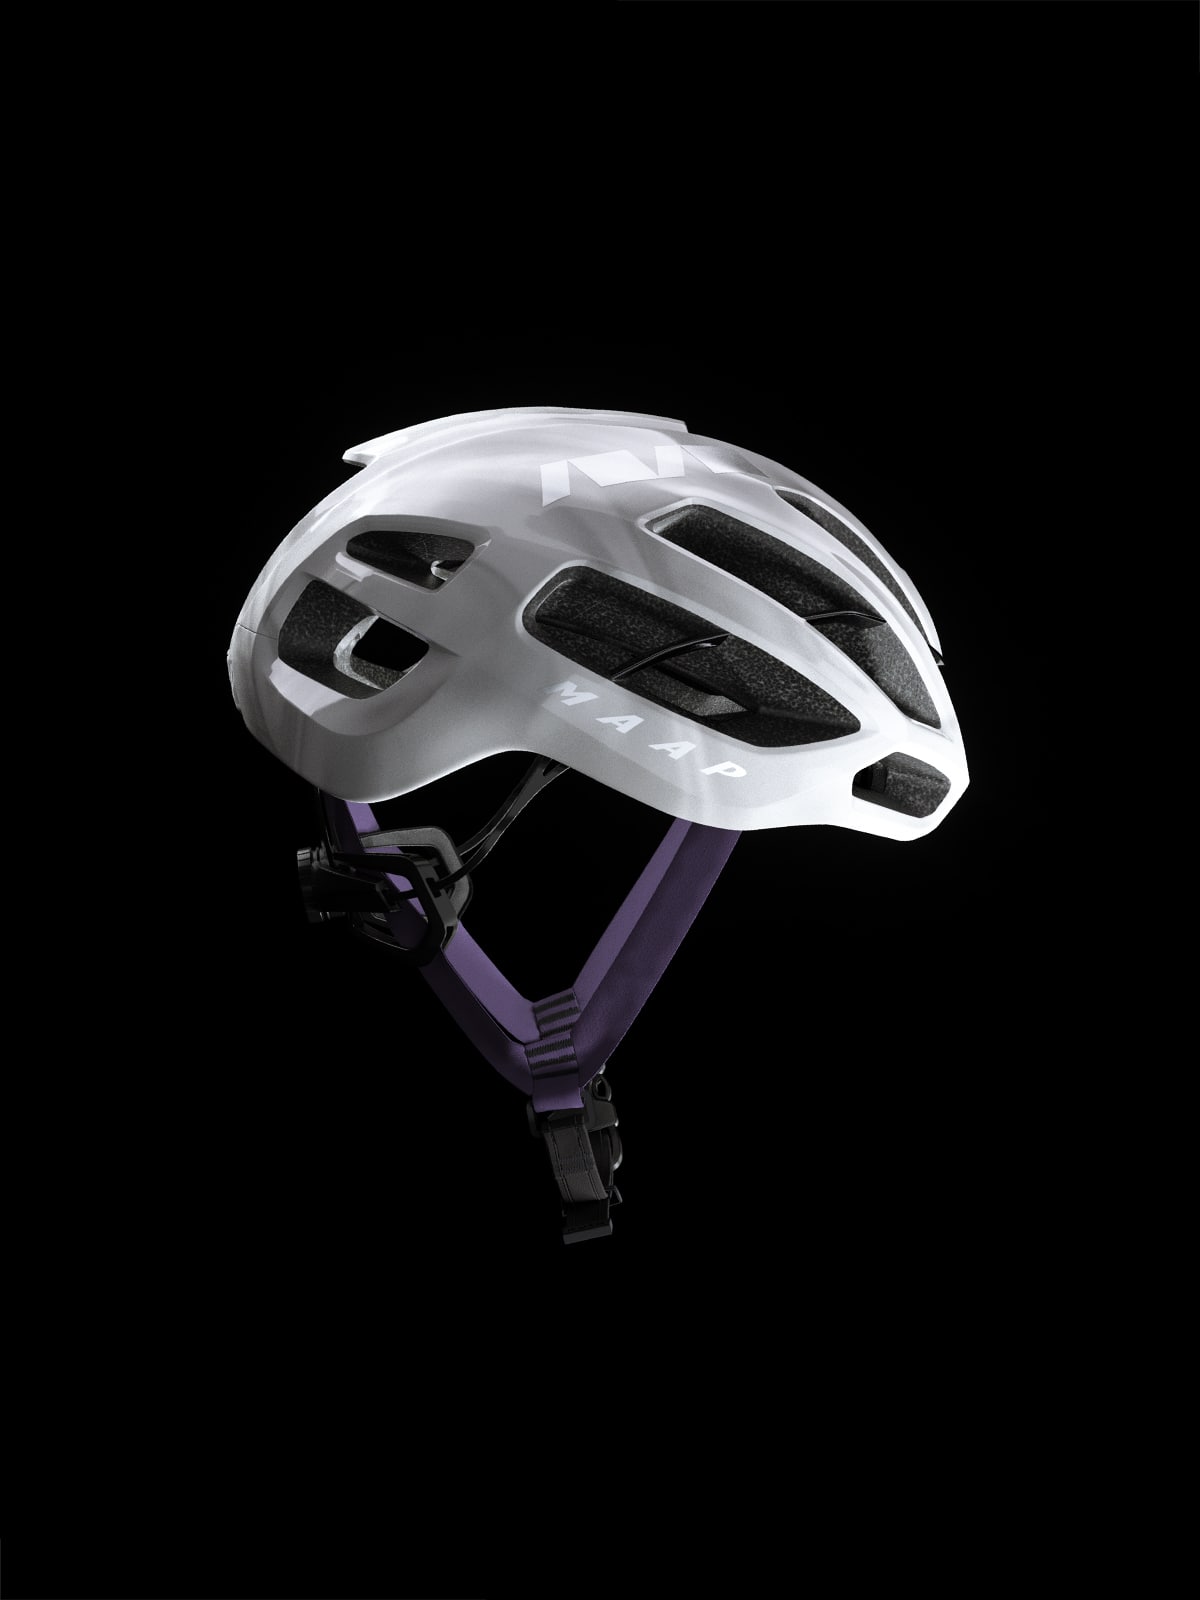 Best Kask Road Helmets: A Quick Guide